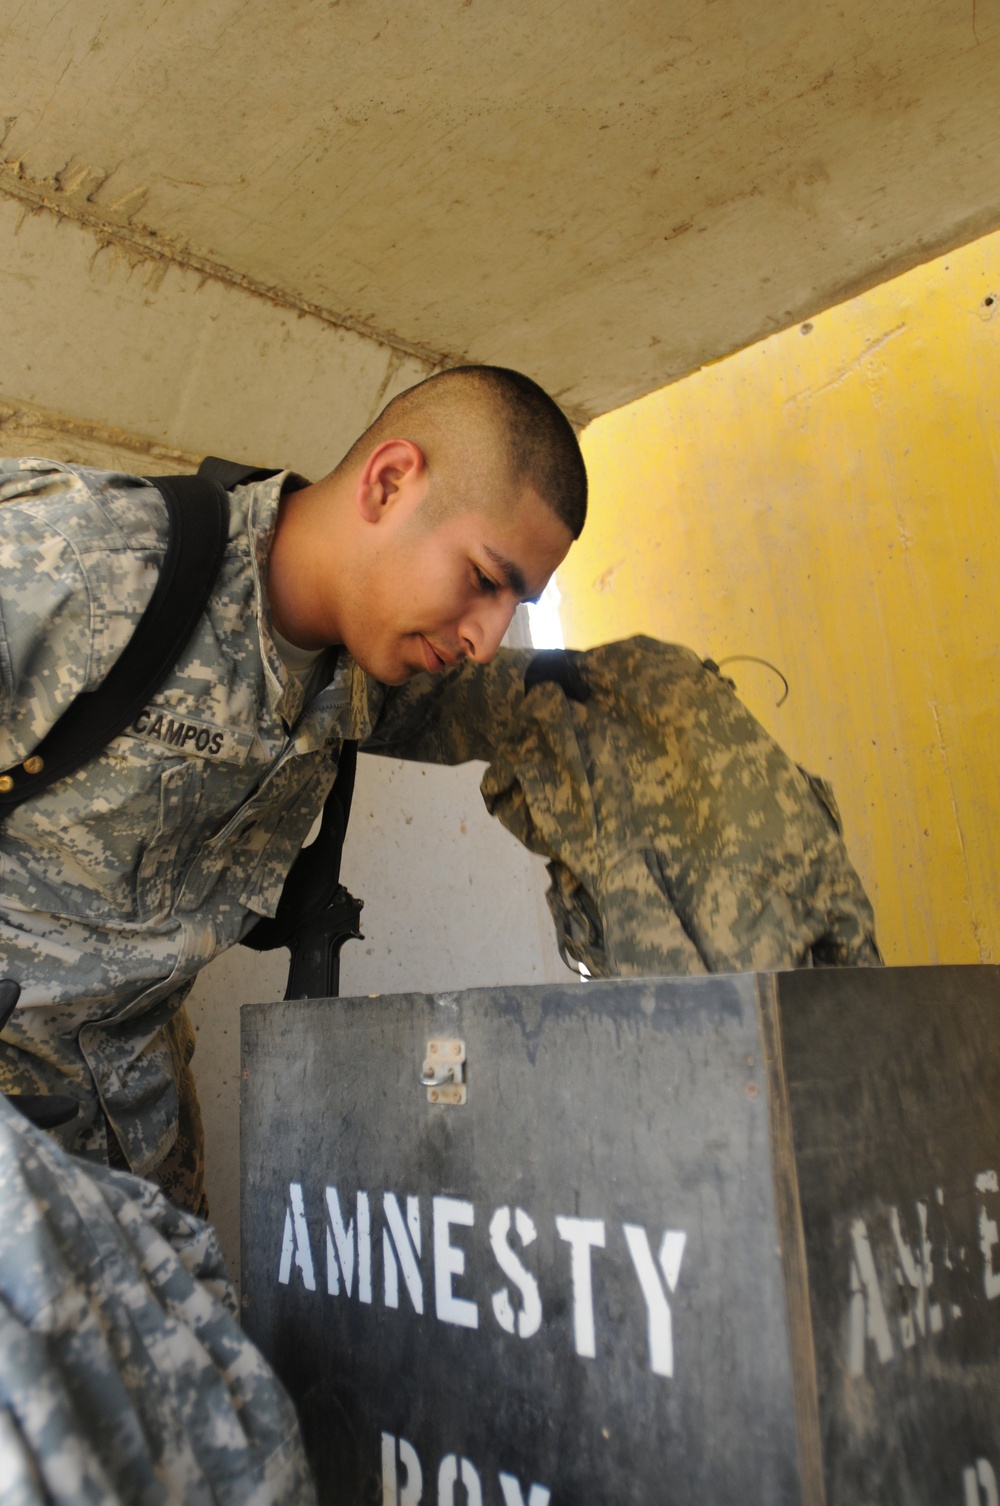 Proper use of amnesty boxes ensures safety of service members